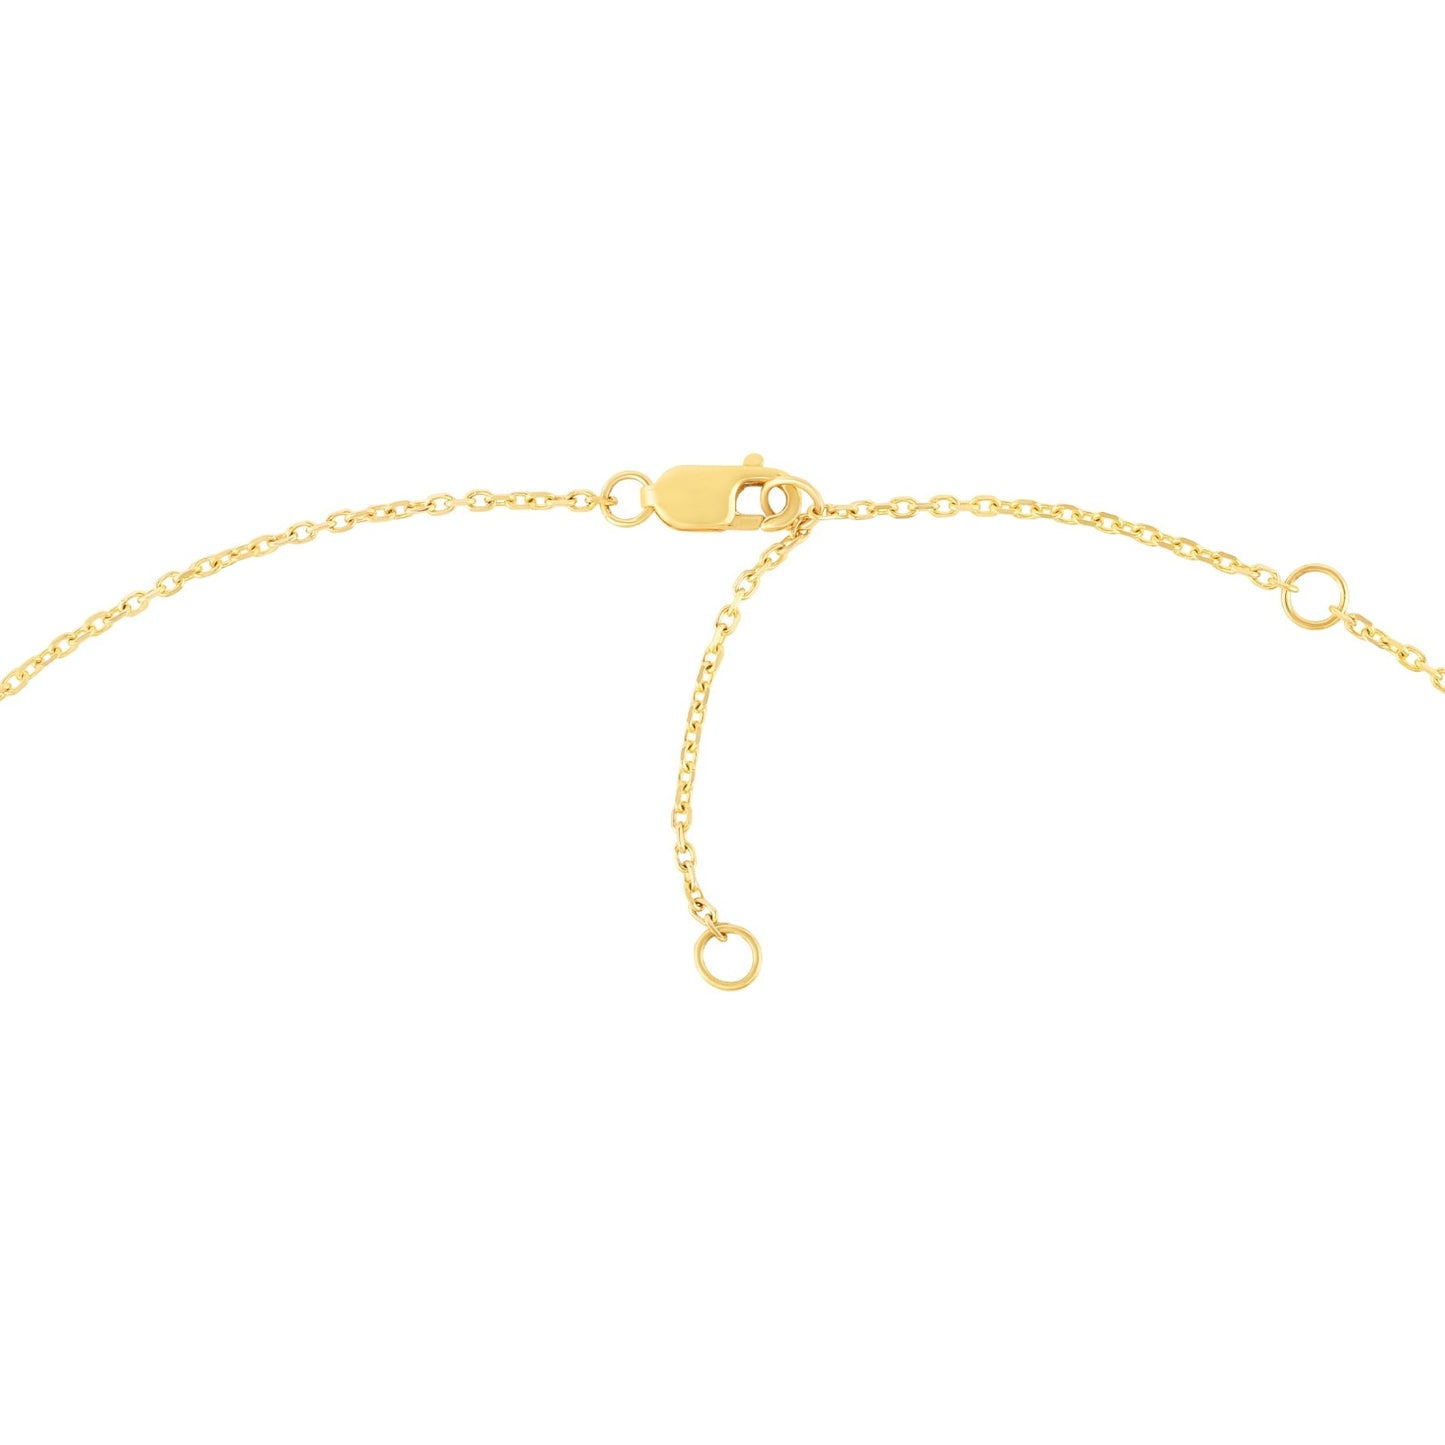 14k gold Stitch Necklace with lobster clasp